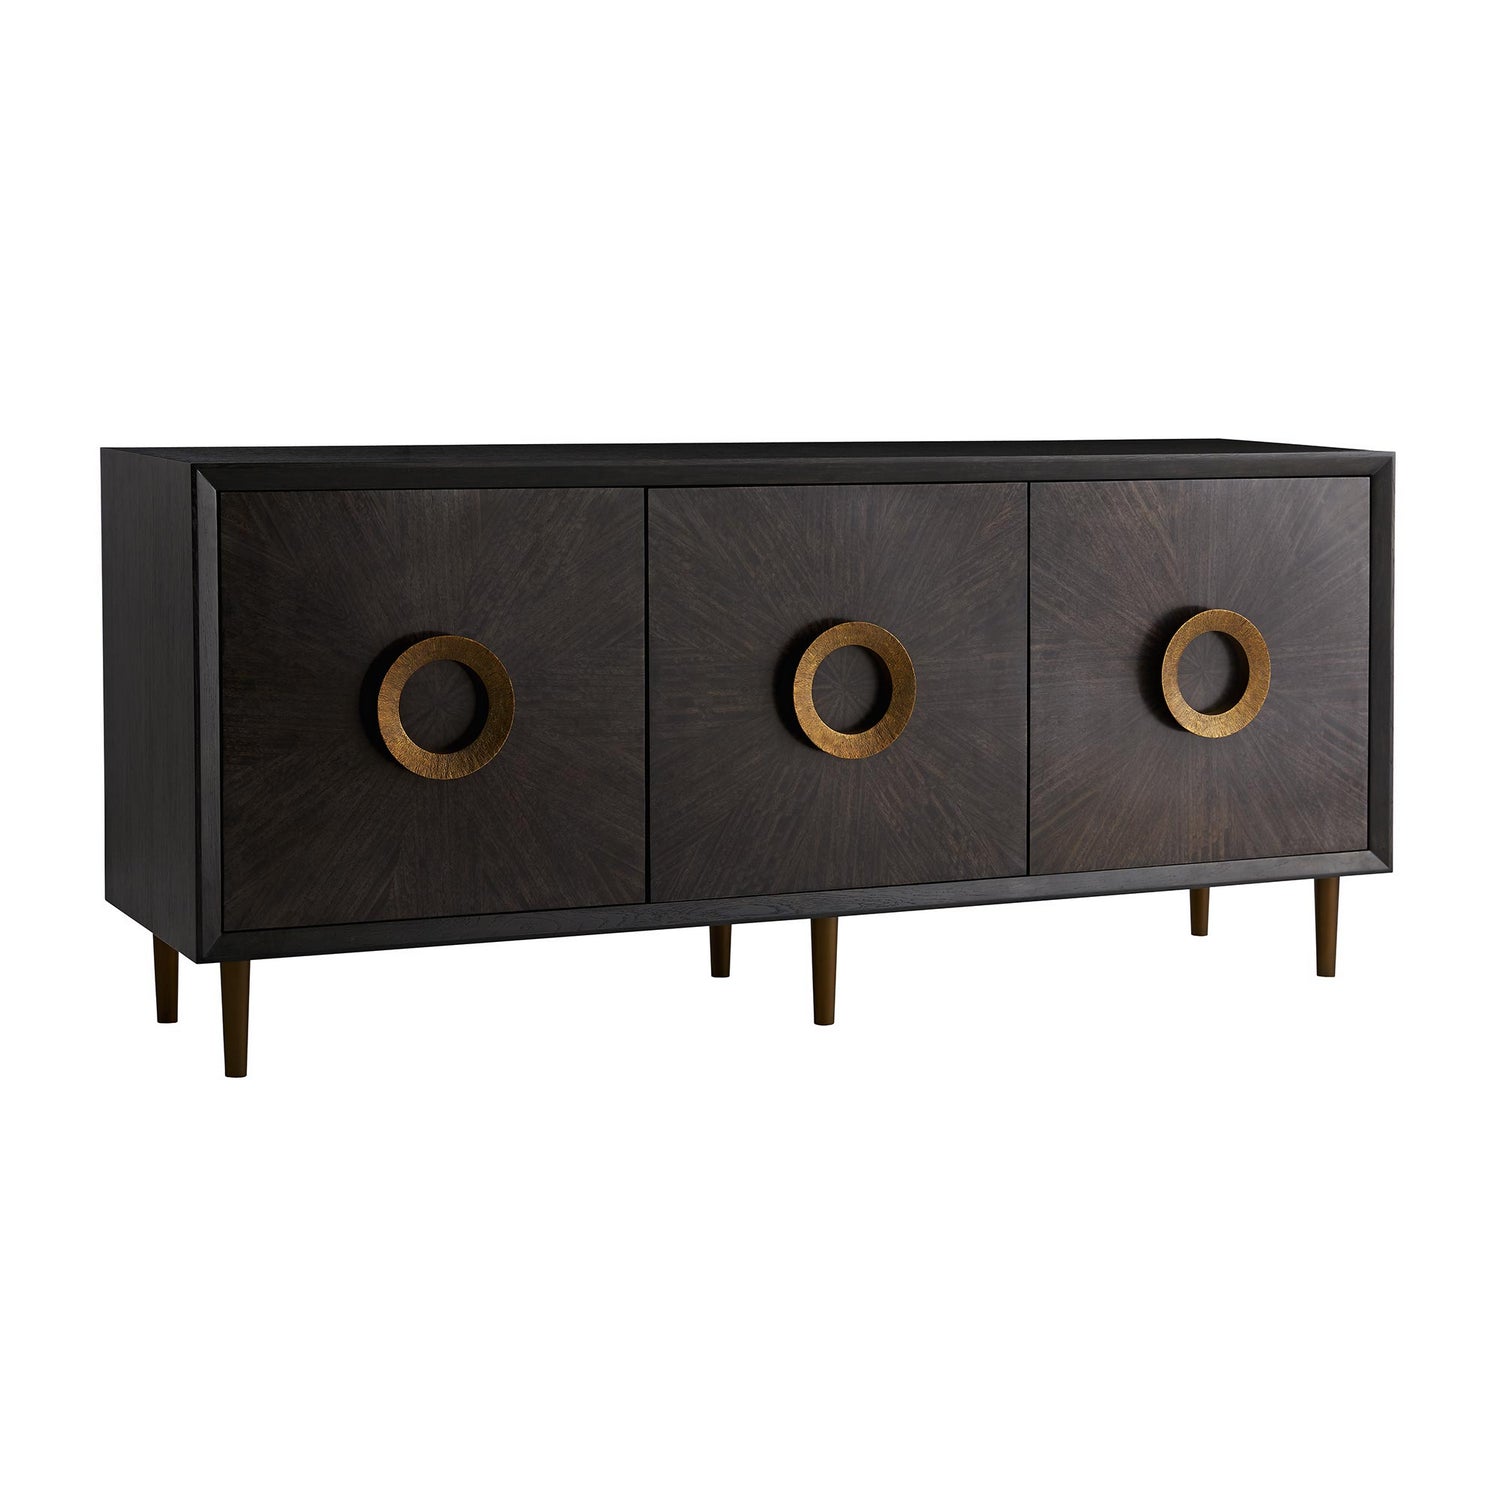 Credenza from the Normandy collection in Sable finish